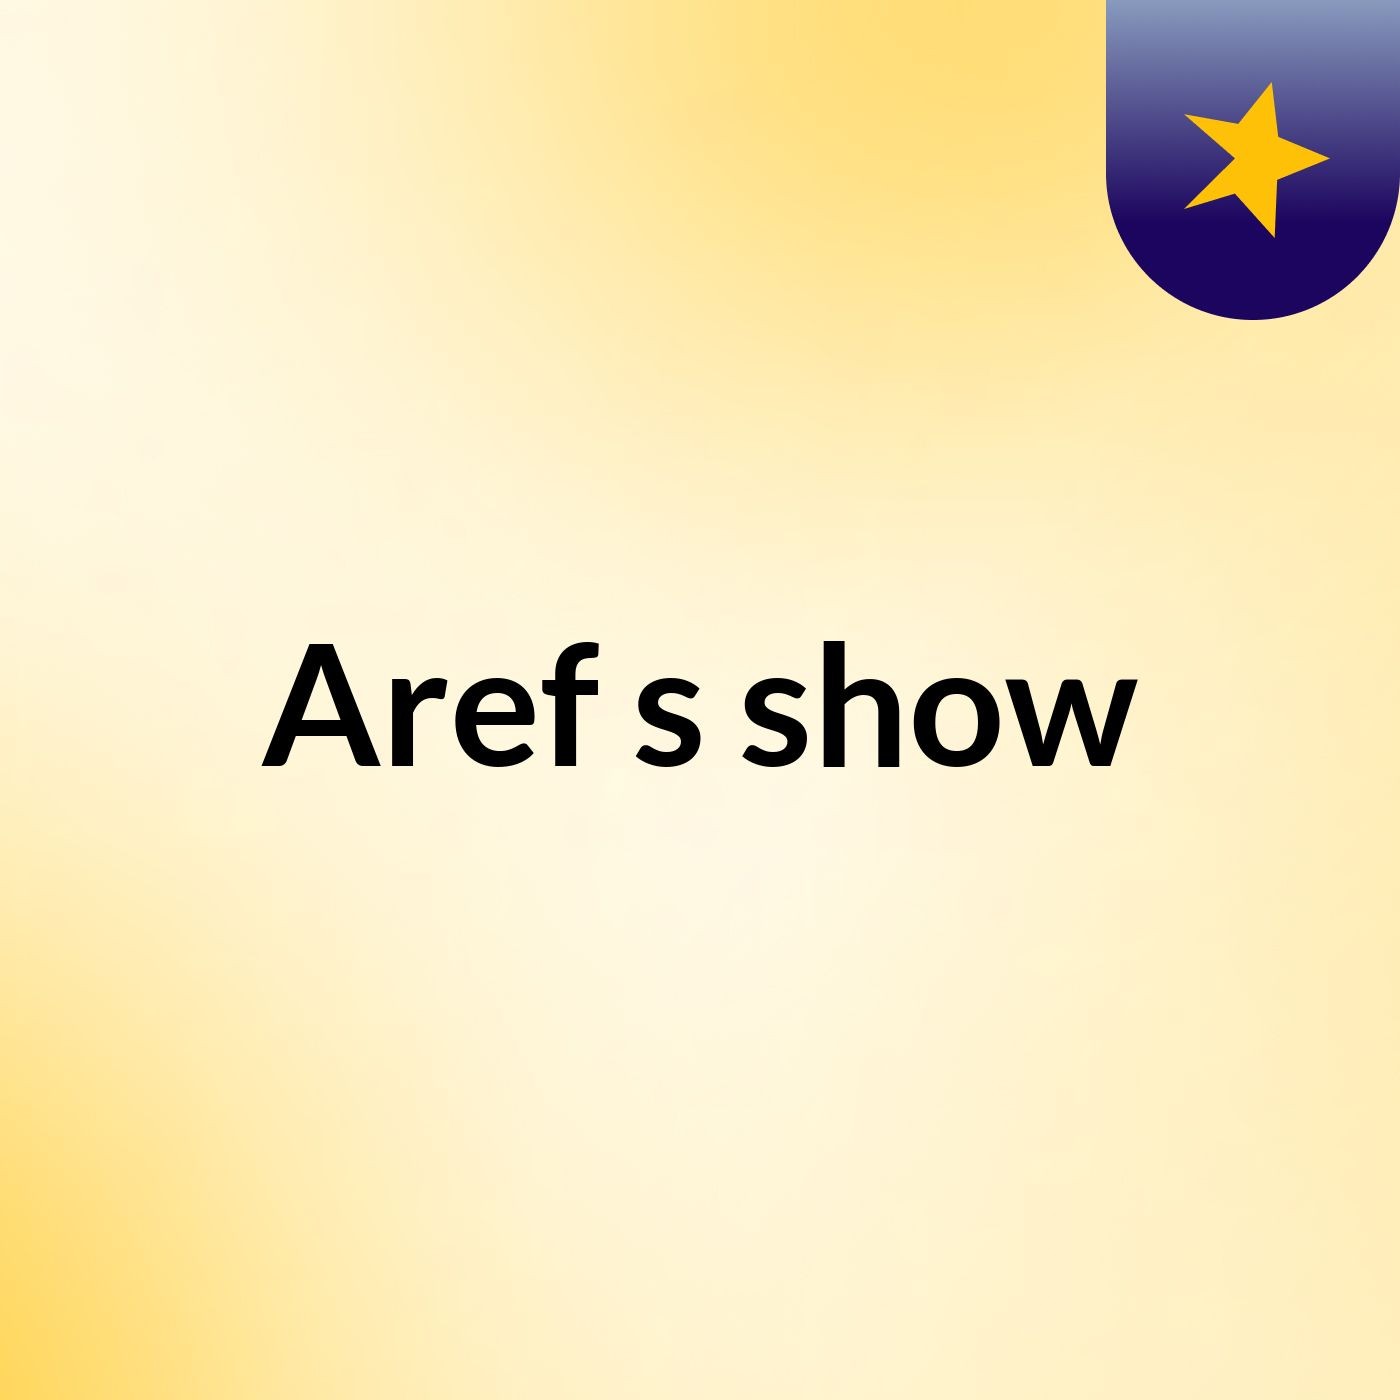 Aref's show